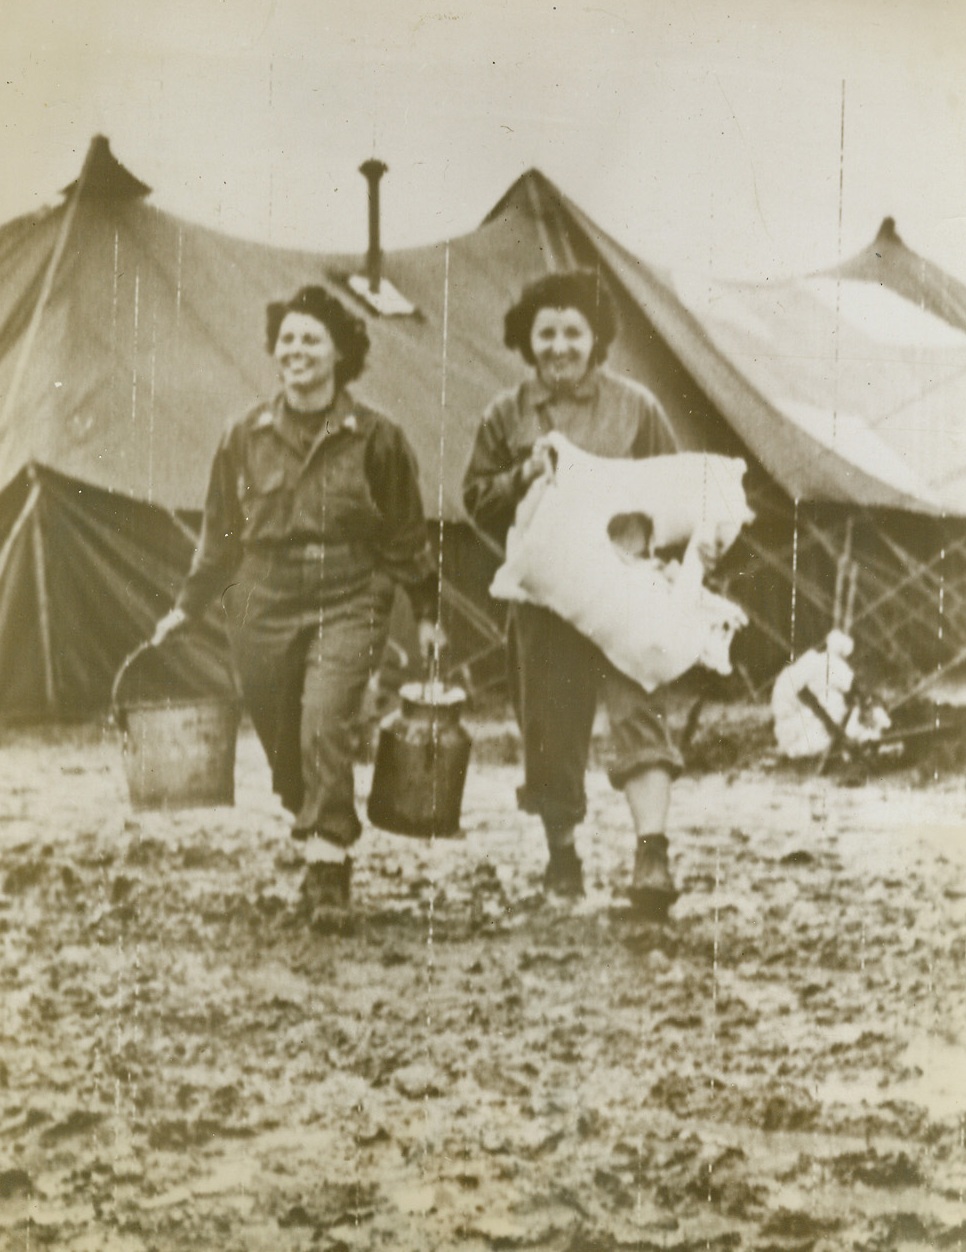 ONCE CALLED “WOMEN IN WHITE”, 11/22/1943. ITALY—A pair of Army nurses slog cheerfully through a sea of mud in Italy, where continuous rains have bogged down both Allied and Nazi ground attack. They are (left to right) Lt. Sylvia Hamper, Joliet, Ill., who carries pails used for mixing plaster, and Lt. Anna Lange, of Ashley, Ill., who holds a section of a prefabricated plaster cast. Credit: Acme photo by Bert Brandt, for the War Picture Pool via Army radiotelephoto;